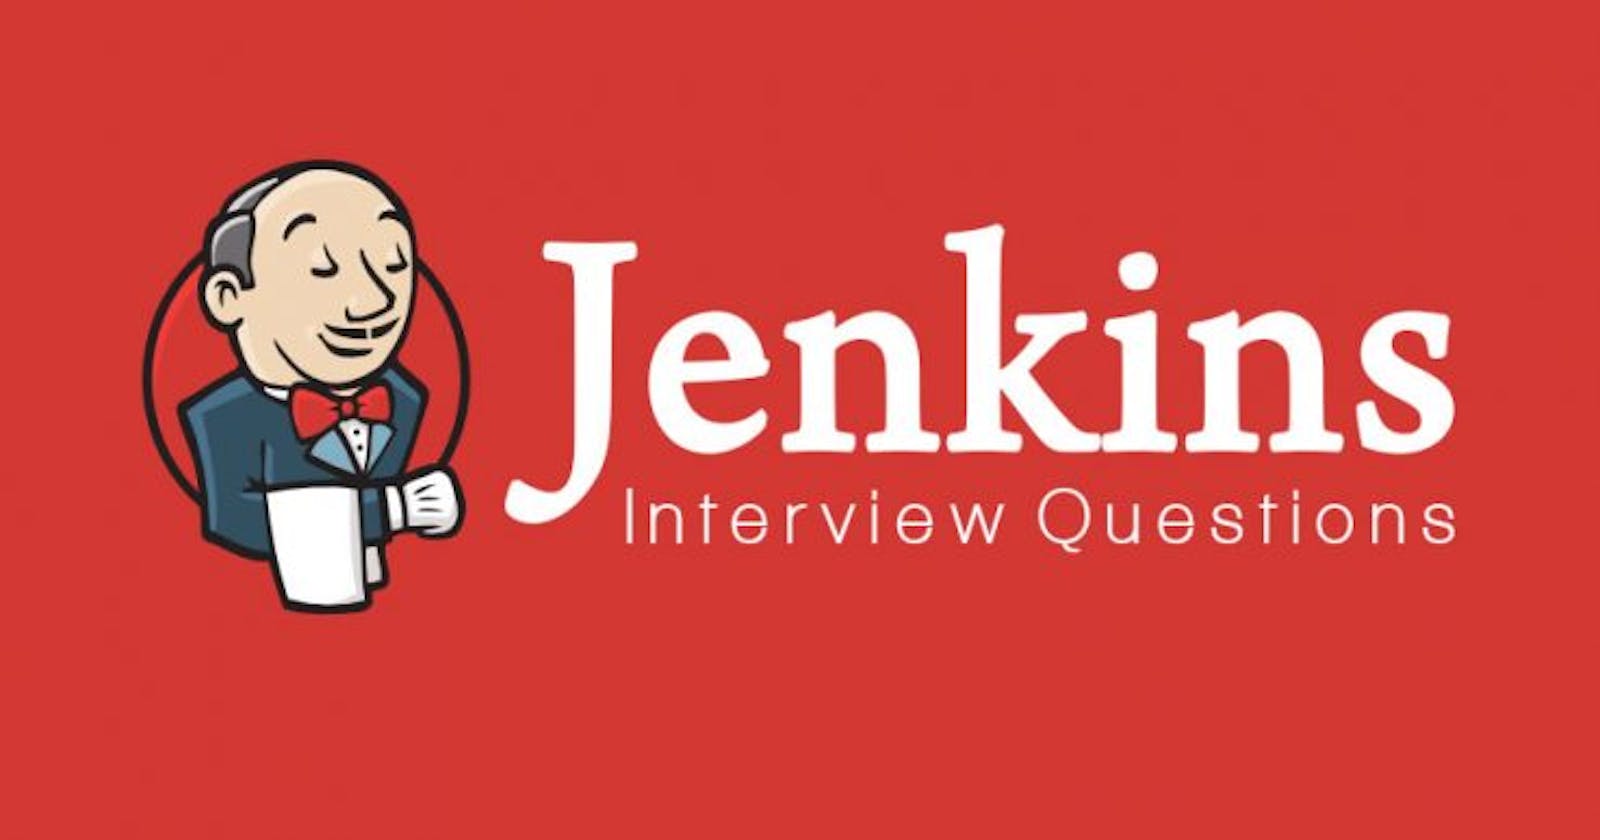 Day 29 Task: Jenkins Important interview Questions.